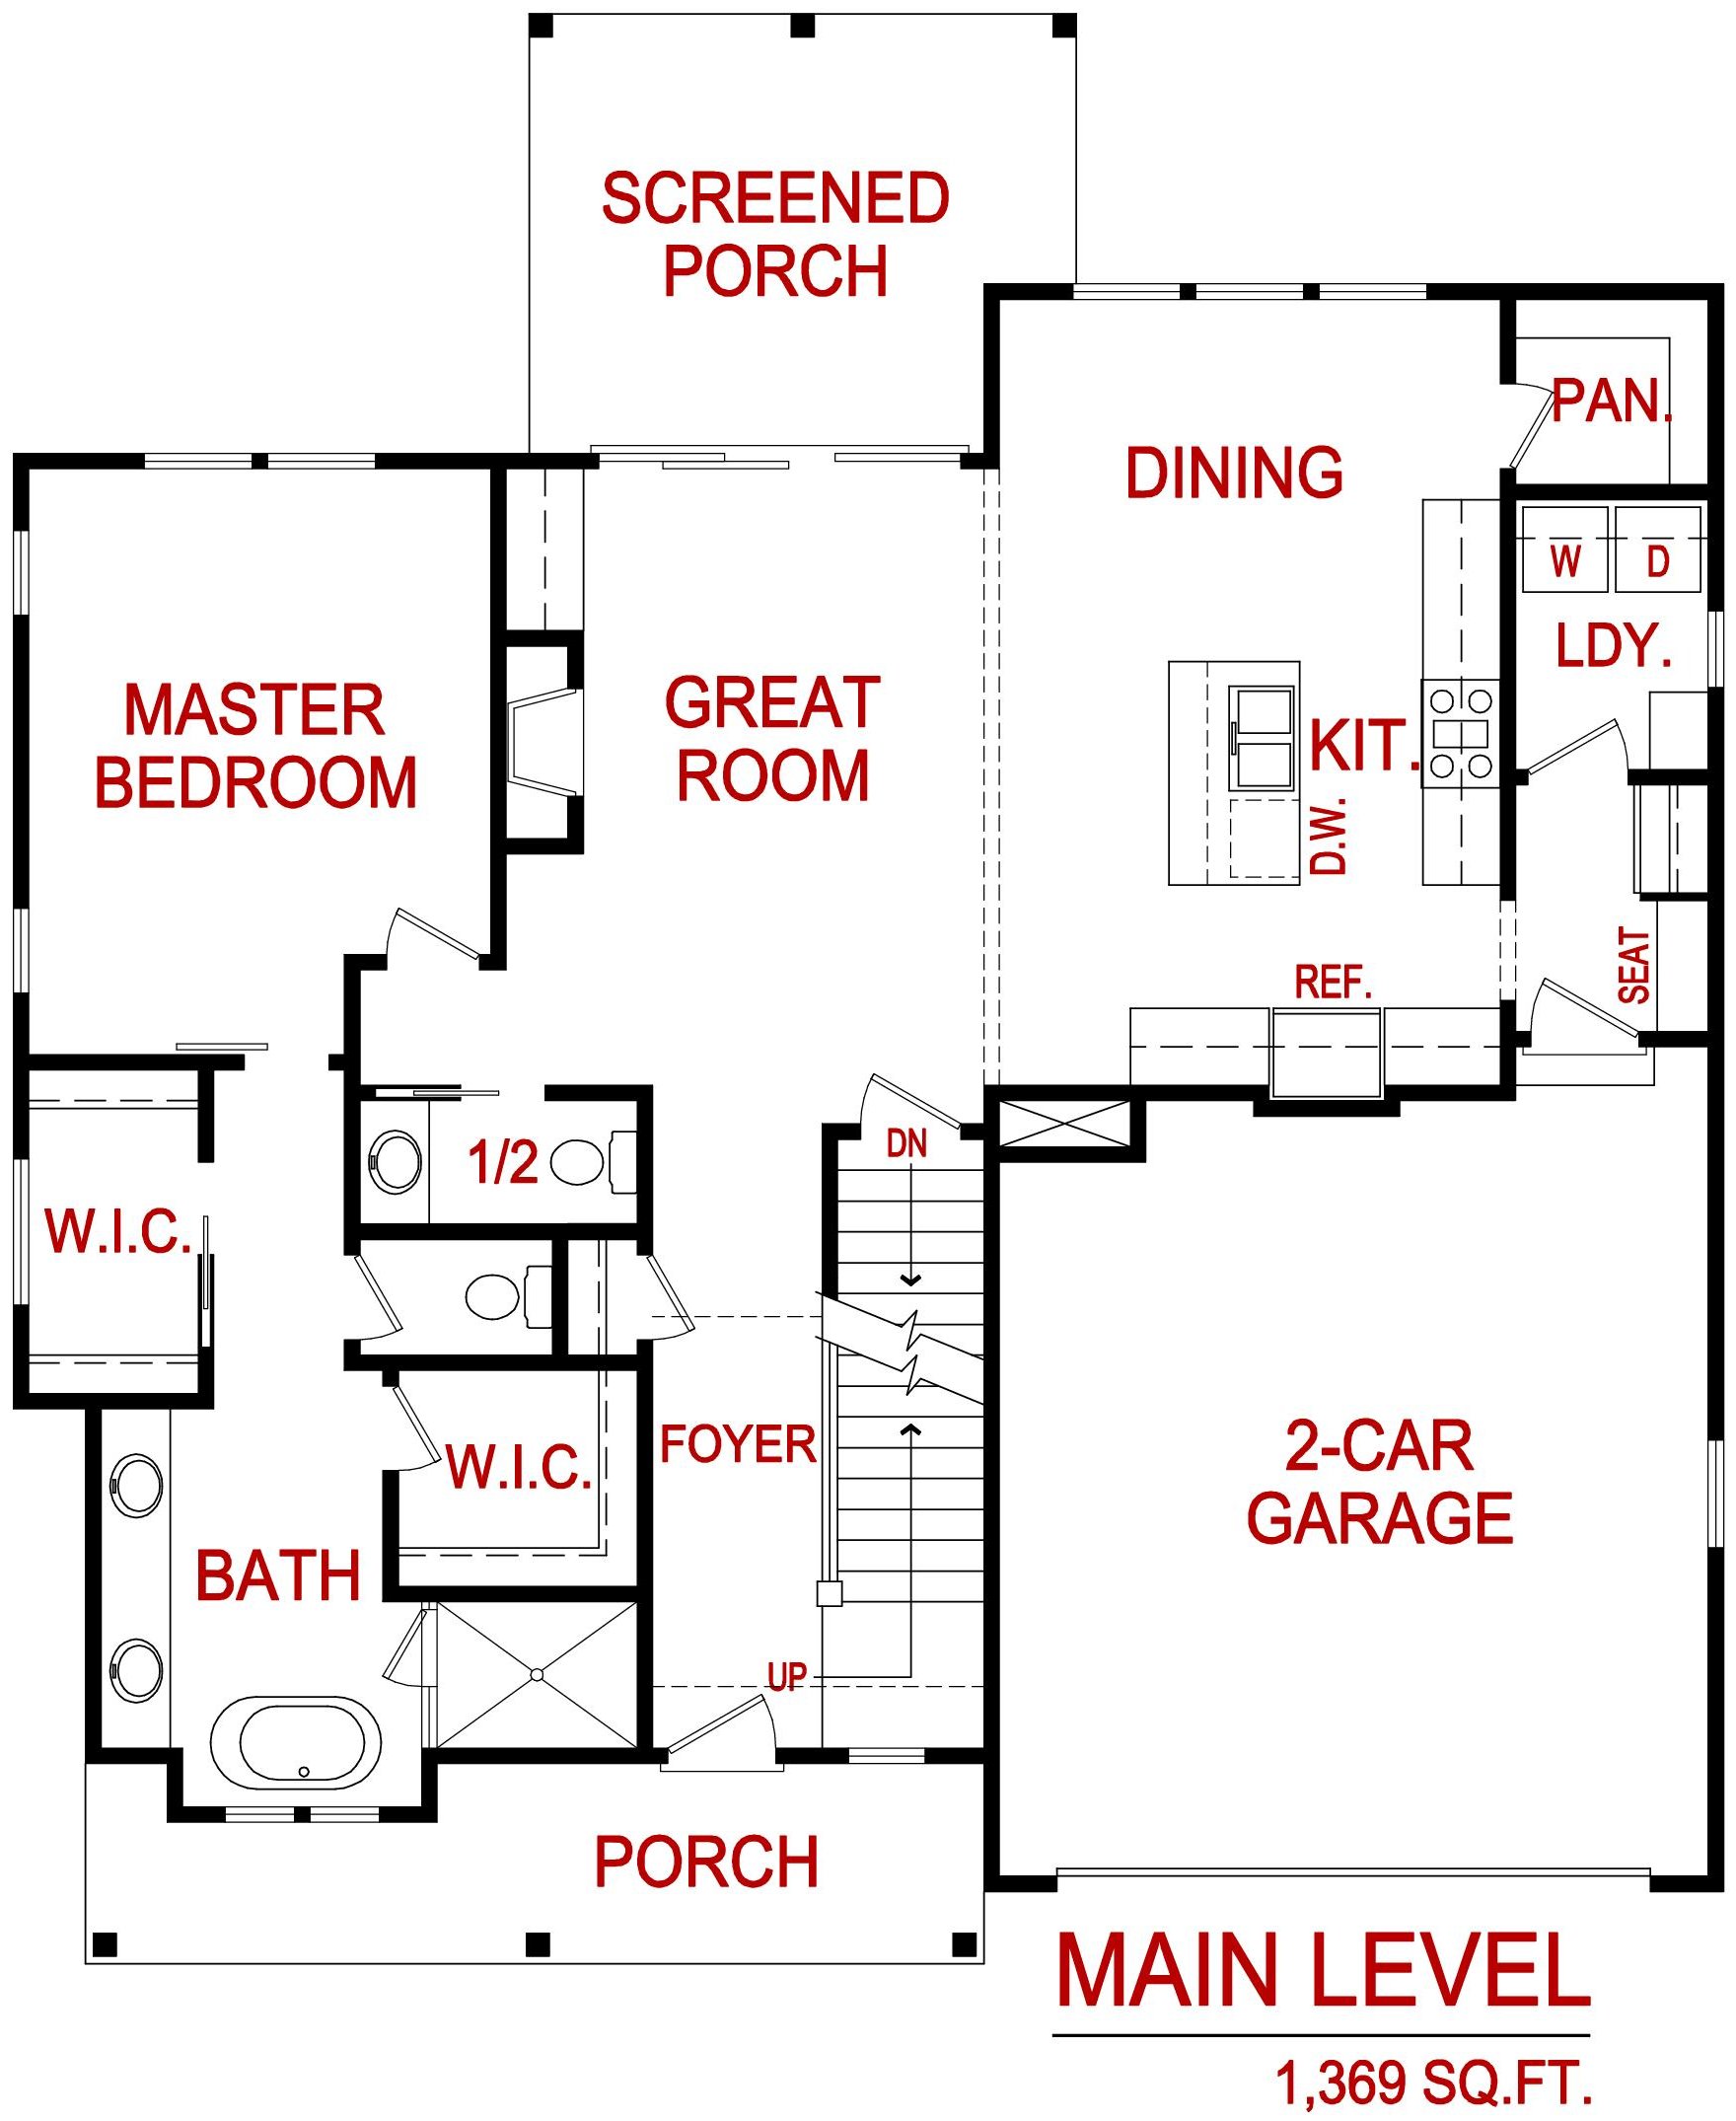 Floor plan of 3911 W. 68th Ter. from Lambie Homes